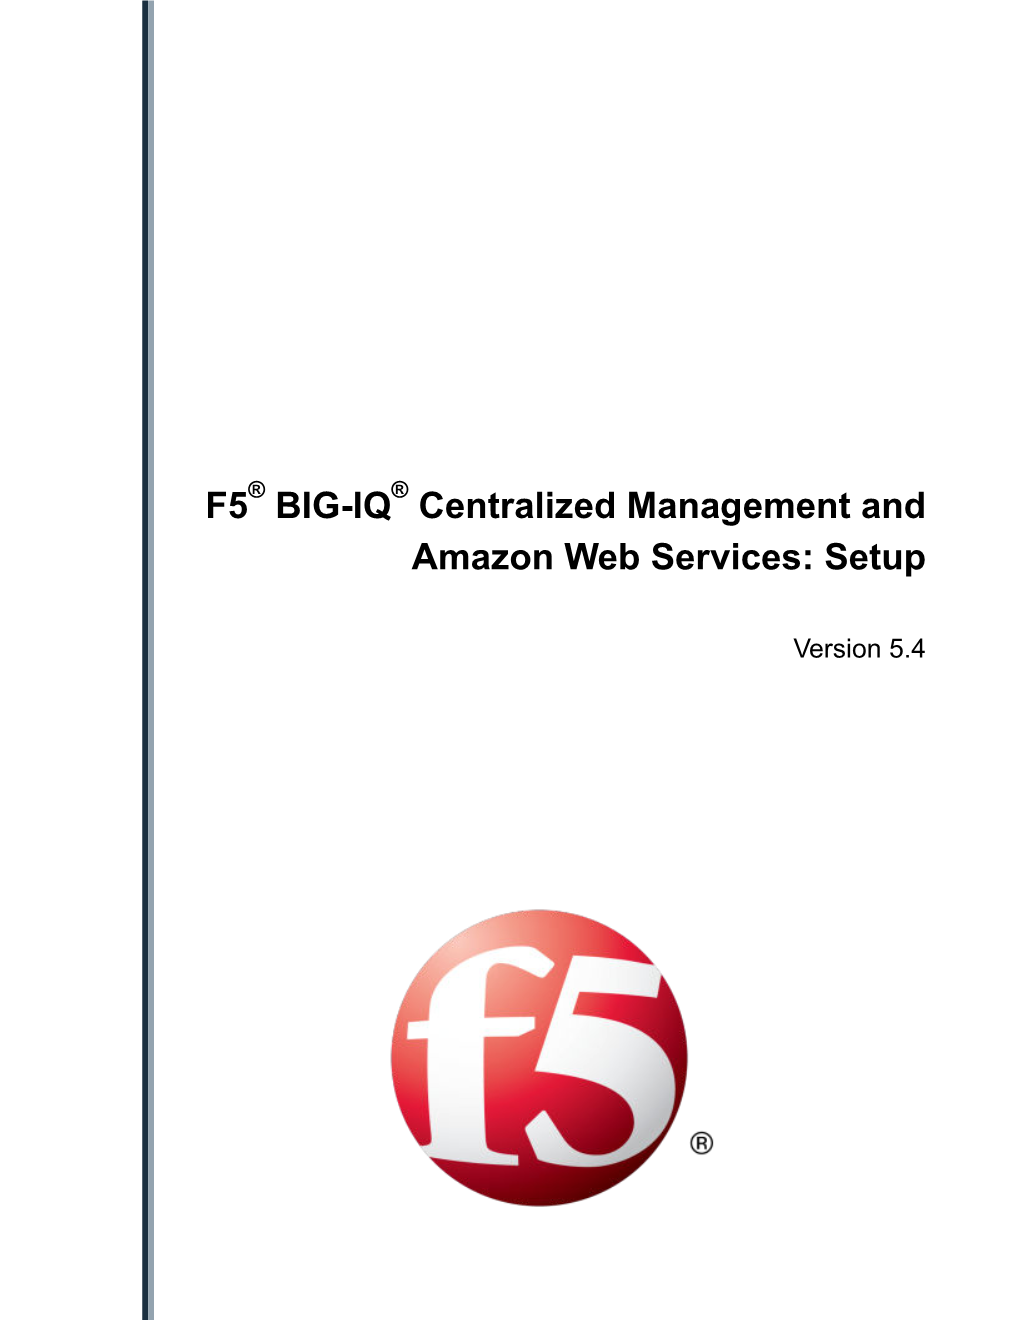 F5 BIG-IQ Centralized Management and Amazon Web Services